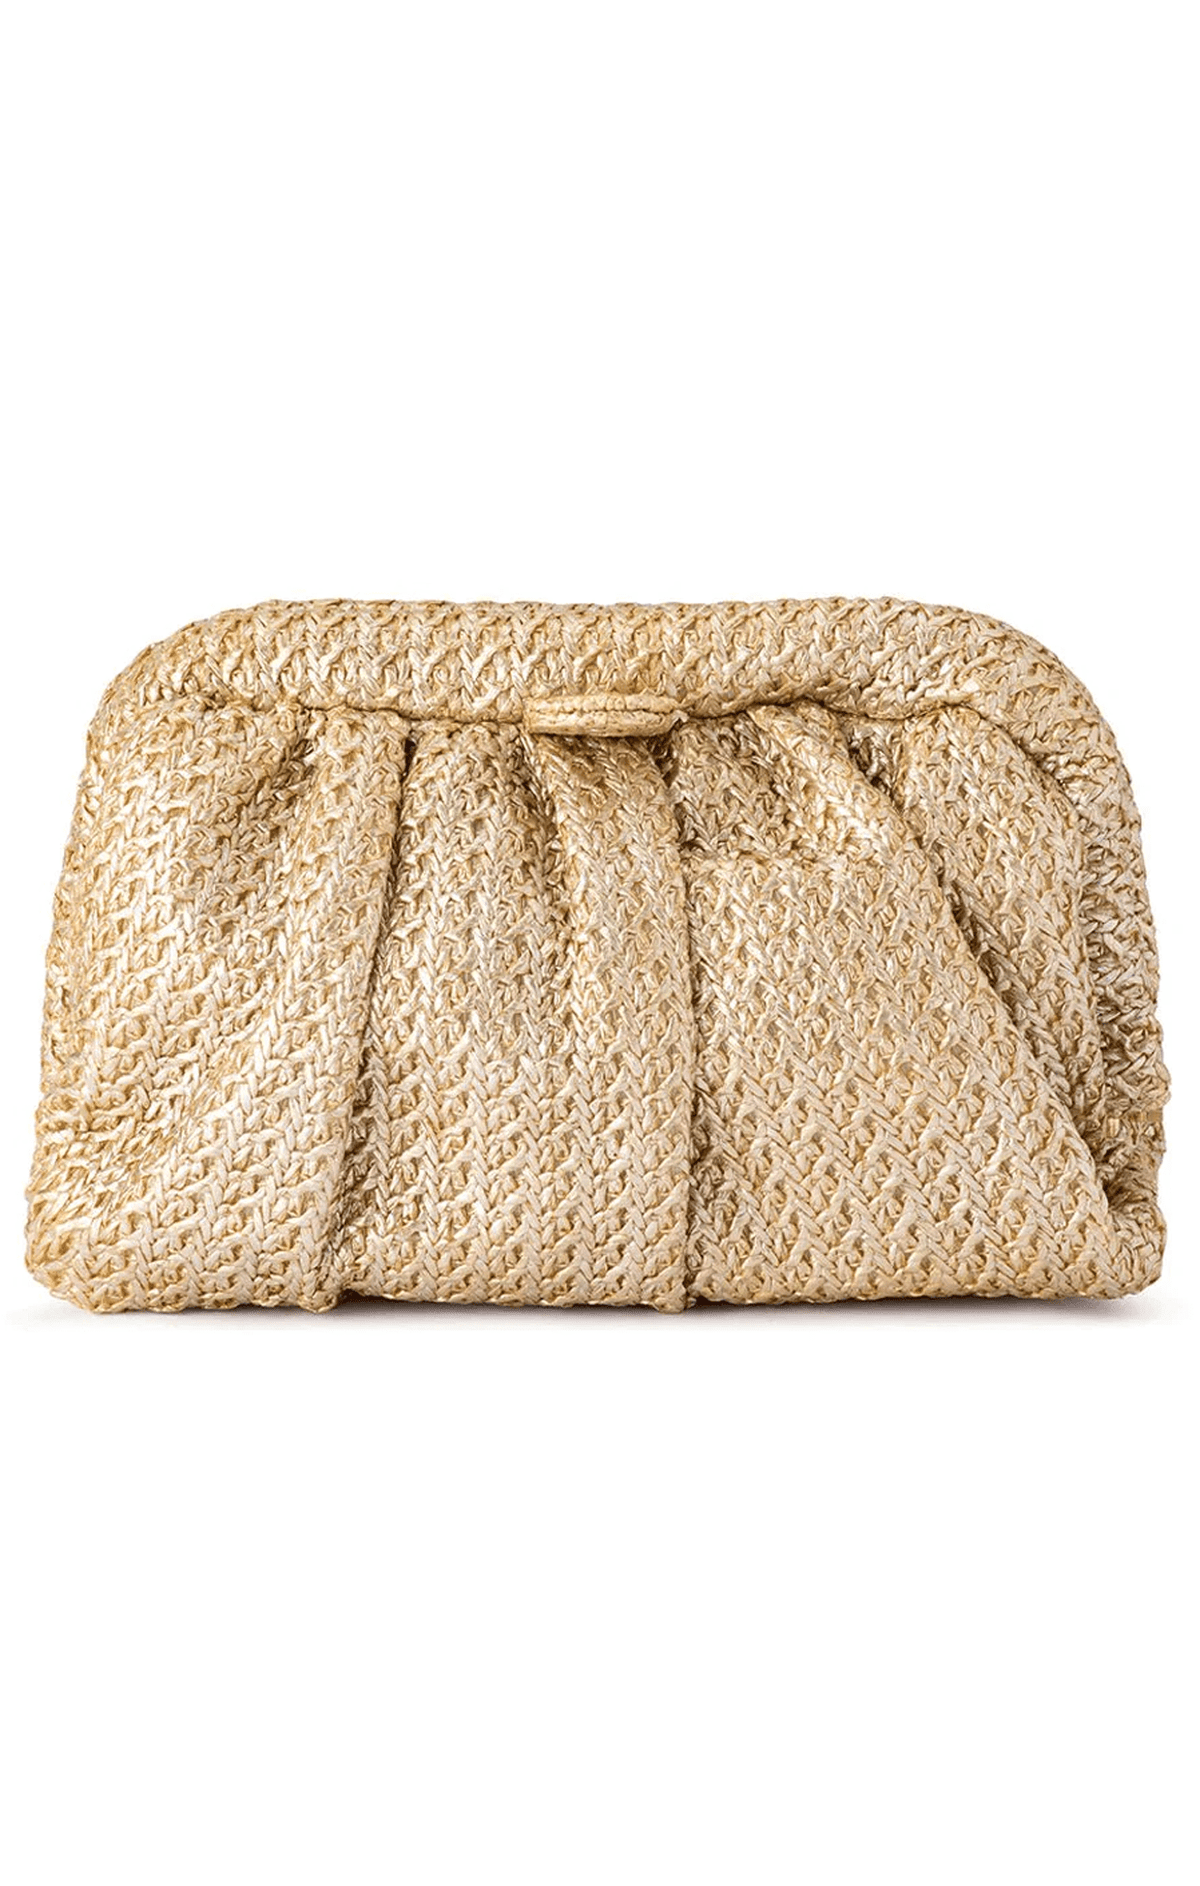 ACCESSORIES Bags Clutches One Size / Gold STEVIE PLEATED WOVEN CLUTCH IN GOLD